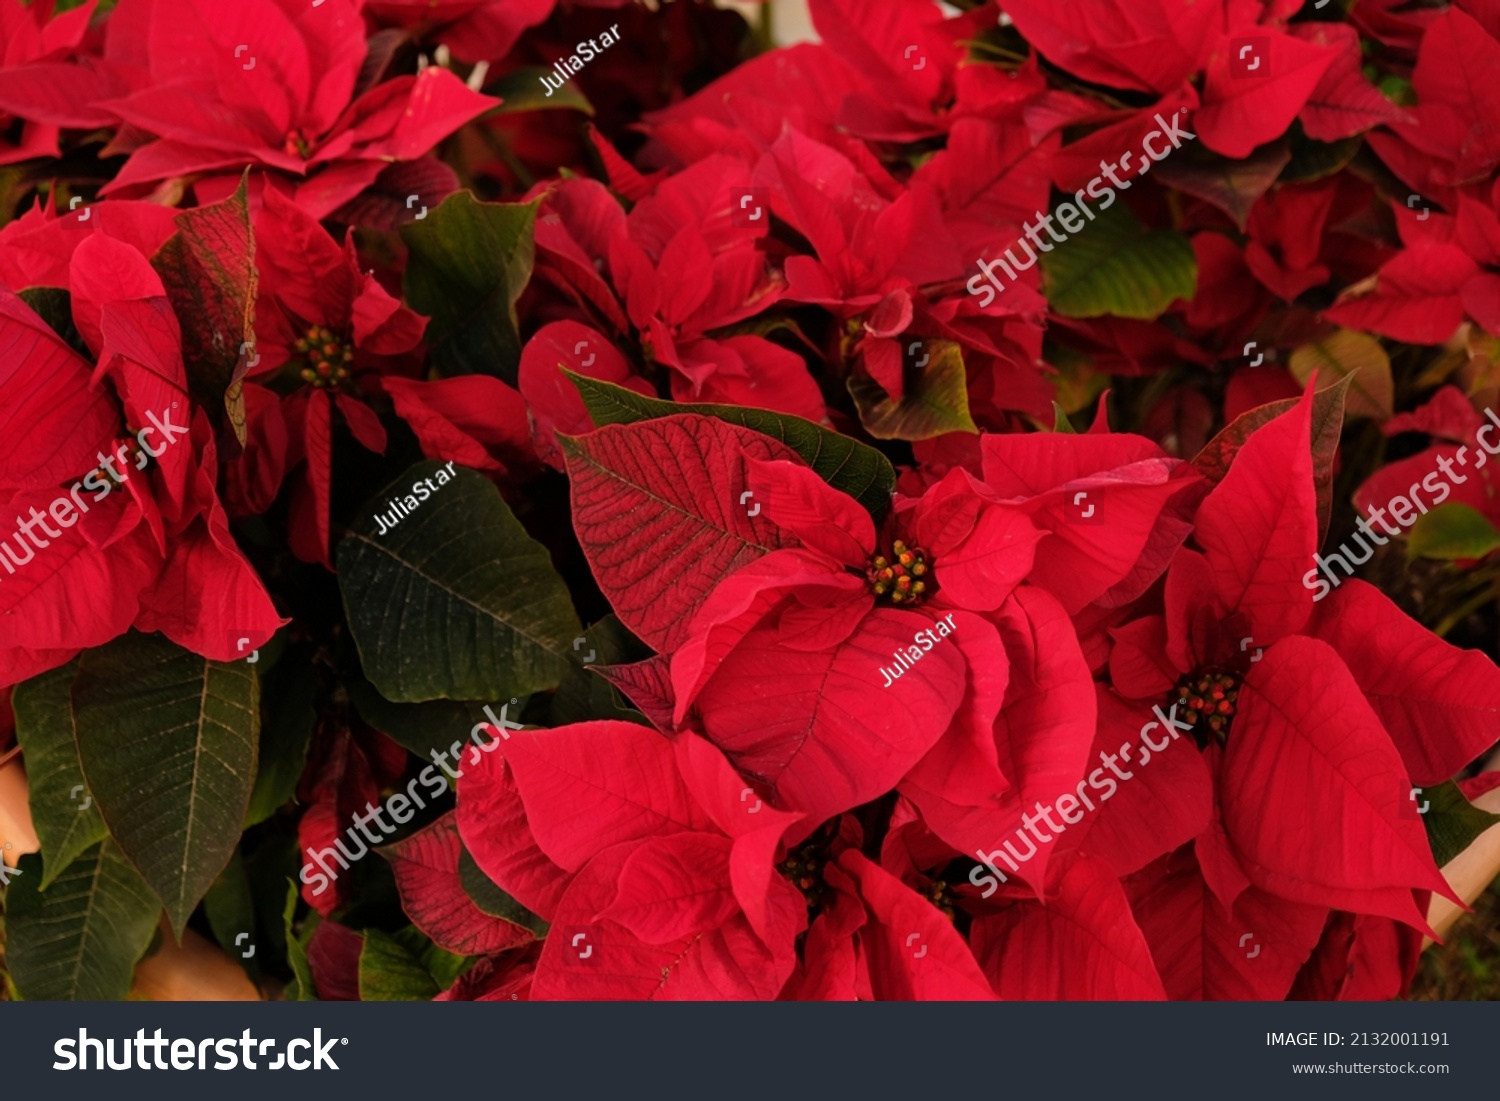 Close-up of red poinsettia flowers (Euphorbia pulcherrima). Red poinsettia, traditional colourful holiday pot plants, for sale in a garden centre. Group of red poinsettia plants. #2132001191